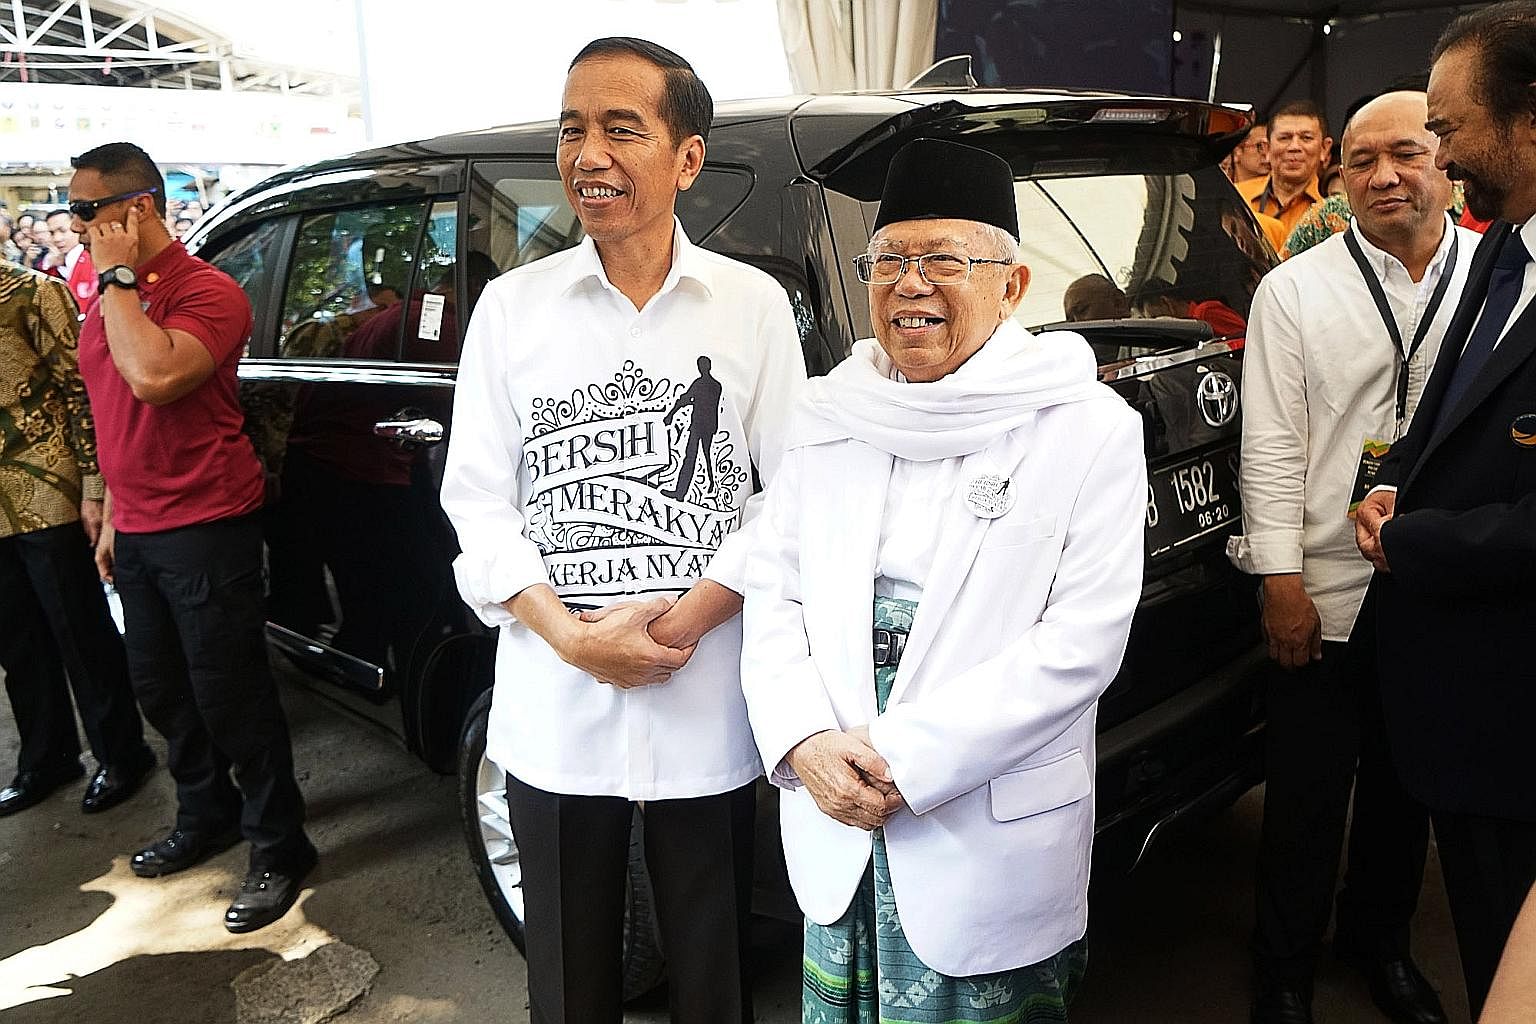 Indonesian President Joko Widodo with his running mate Ma'ruf Amin, who was seen as the weakest performer among the four candidates in the first presidential debate last month.